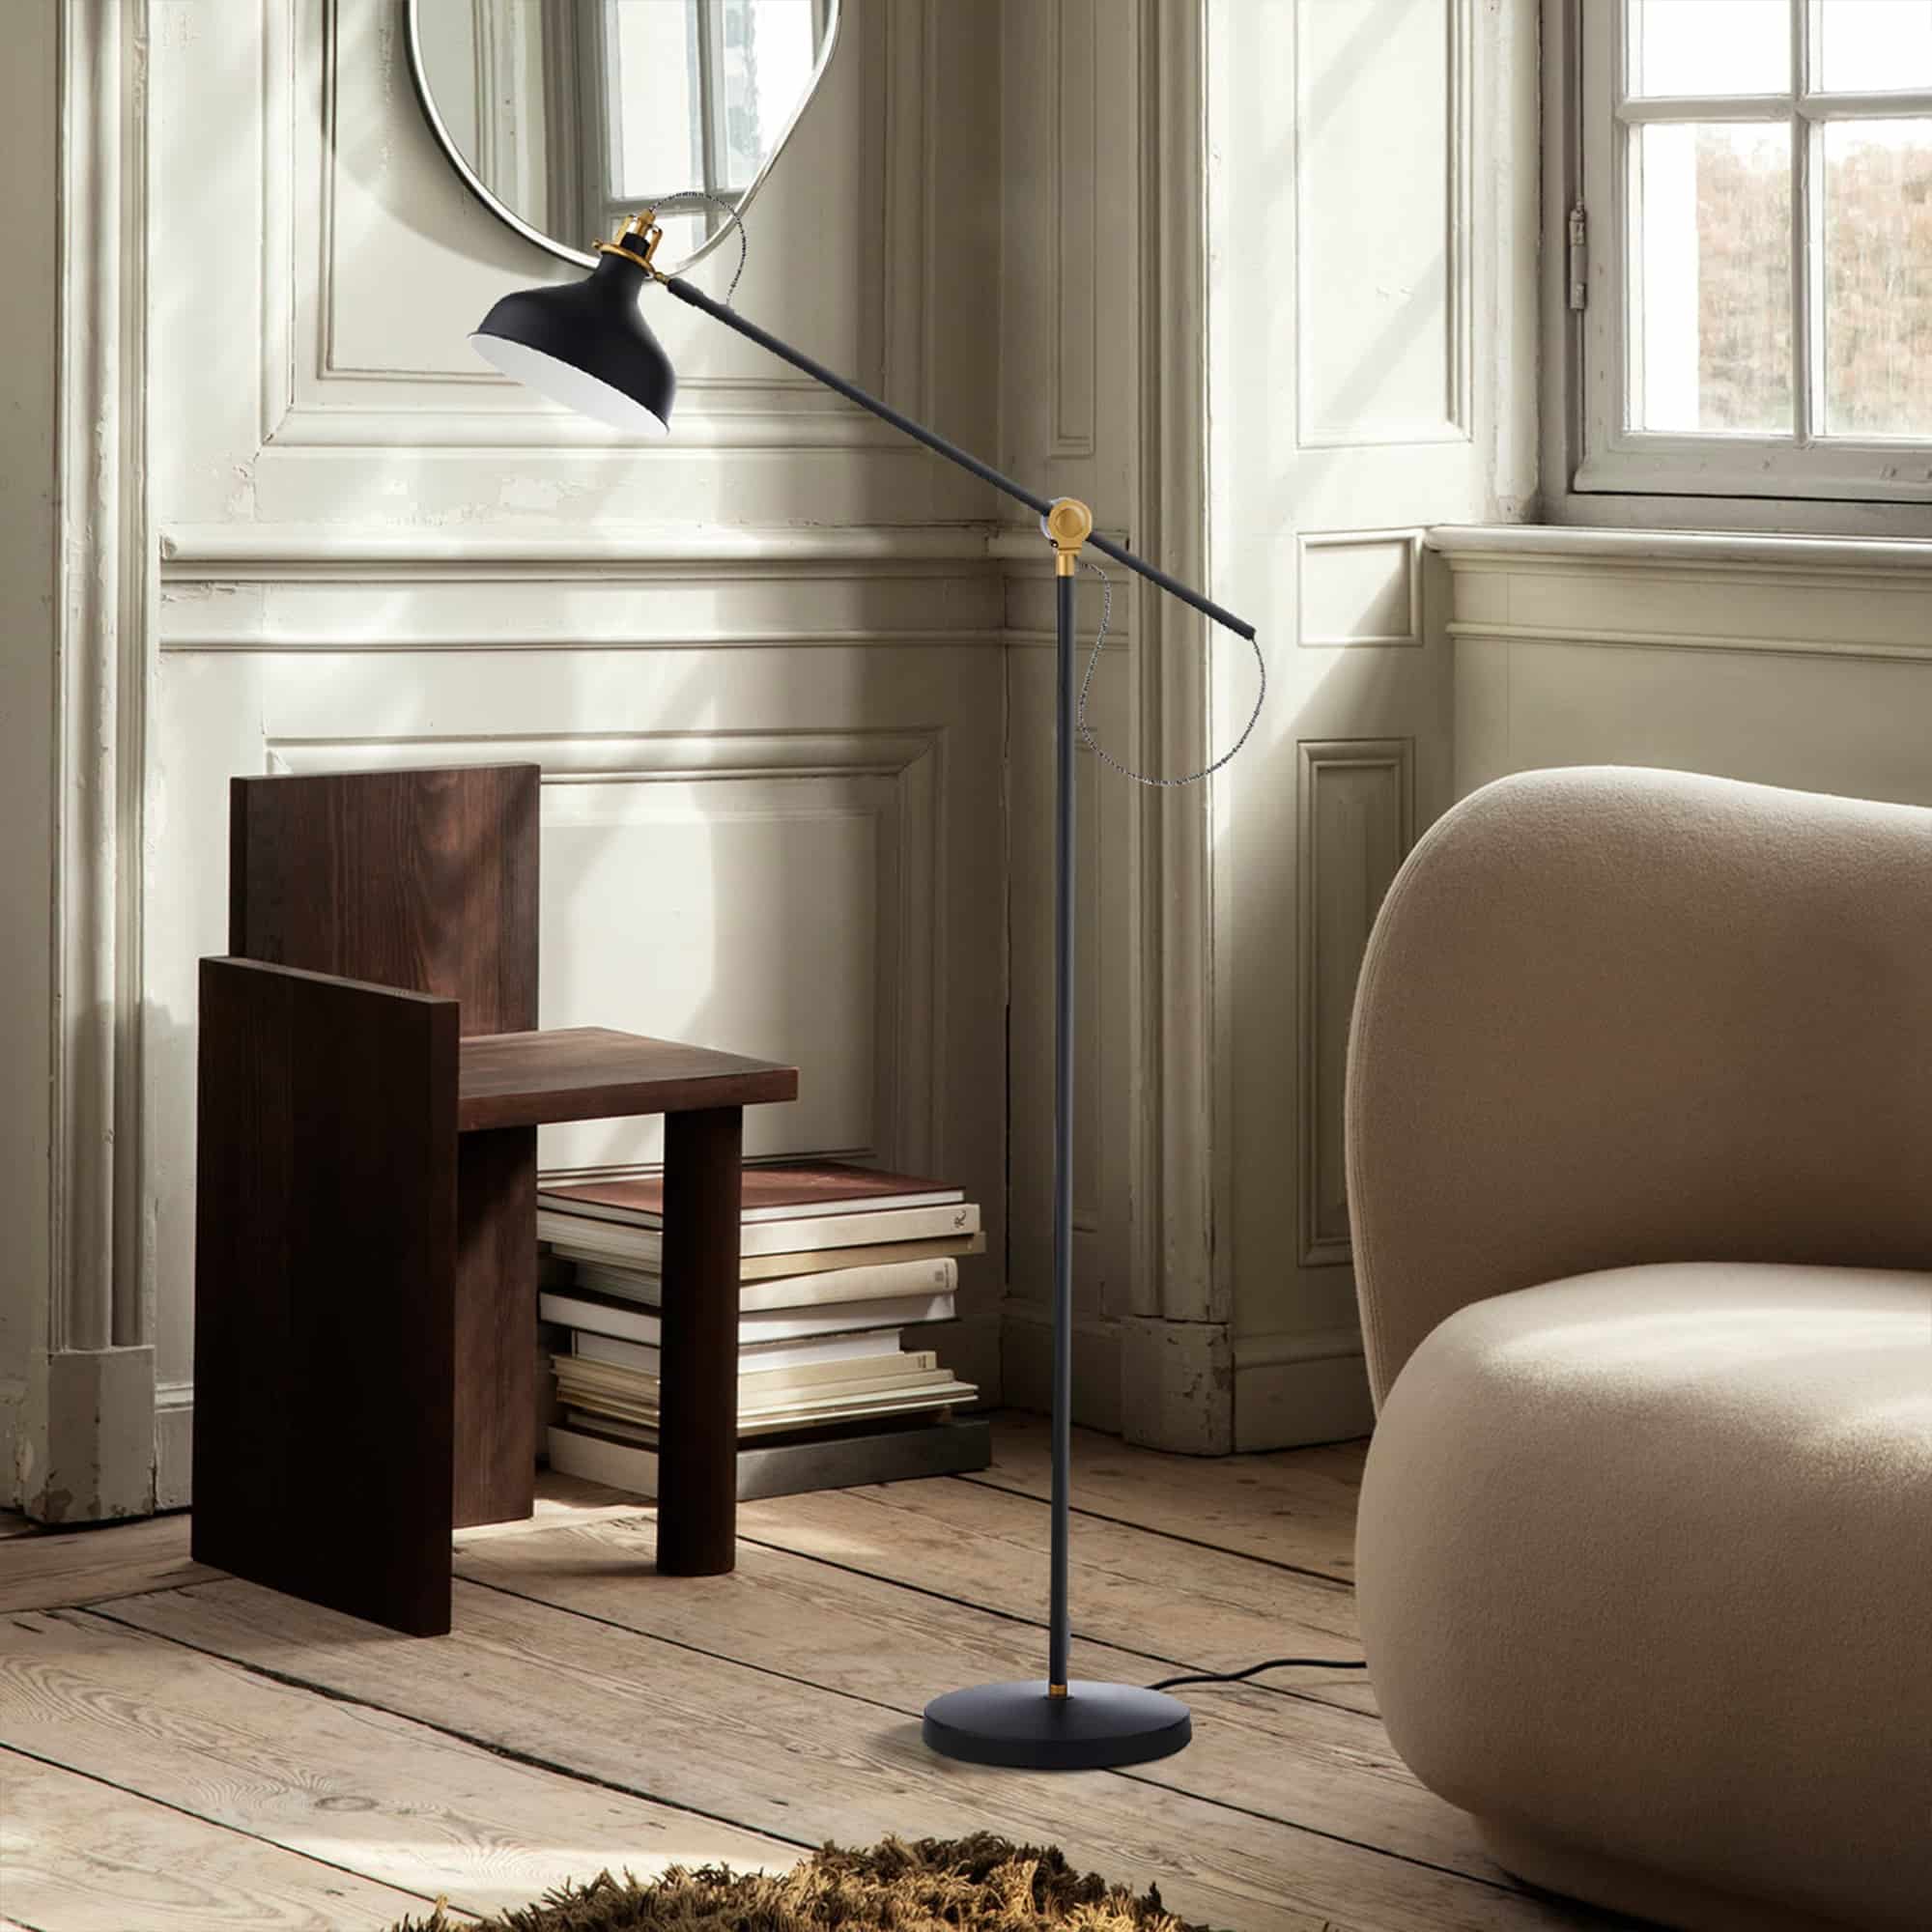 An elegantly designed Calisto Floor Lamp with sleek metallic accents, adjustable angles, and a stable base preventing tipping.